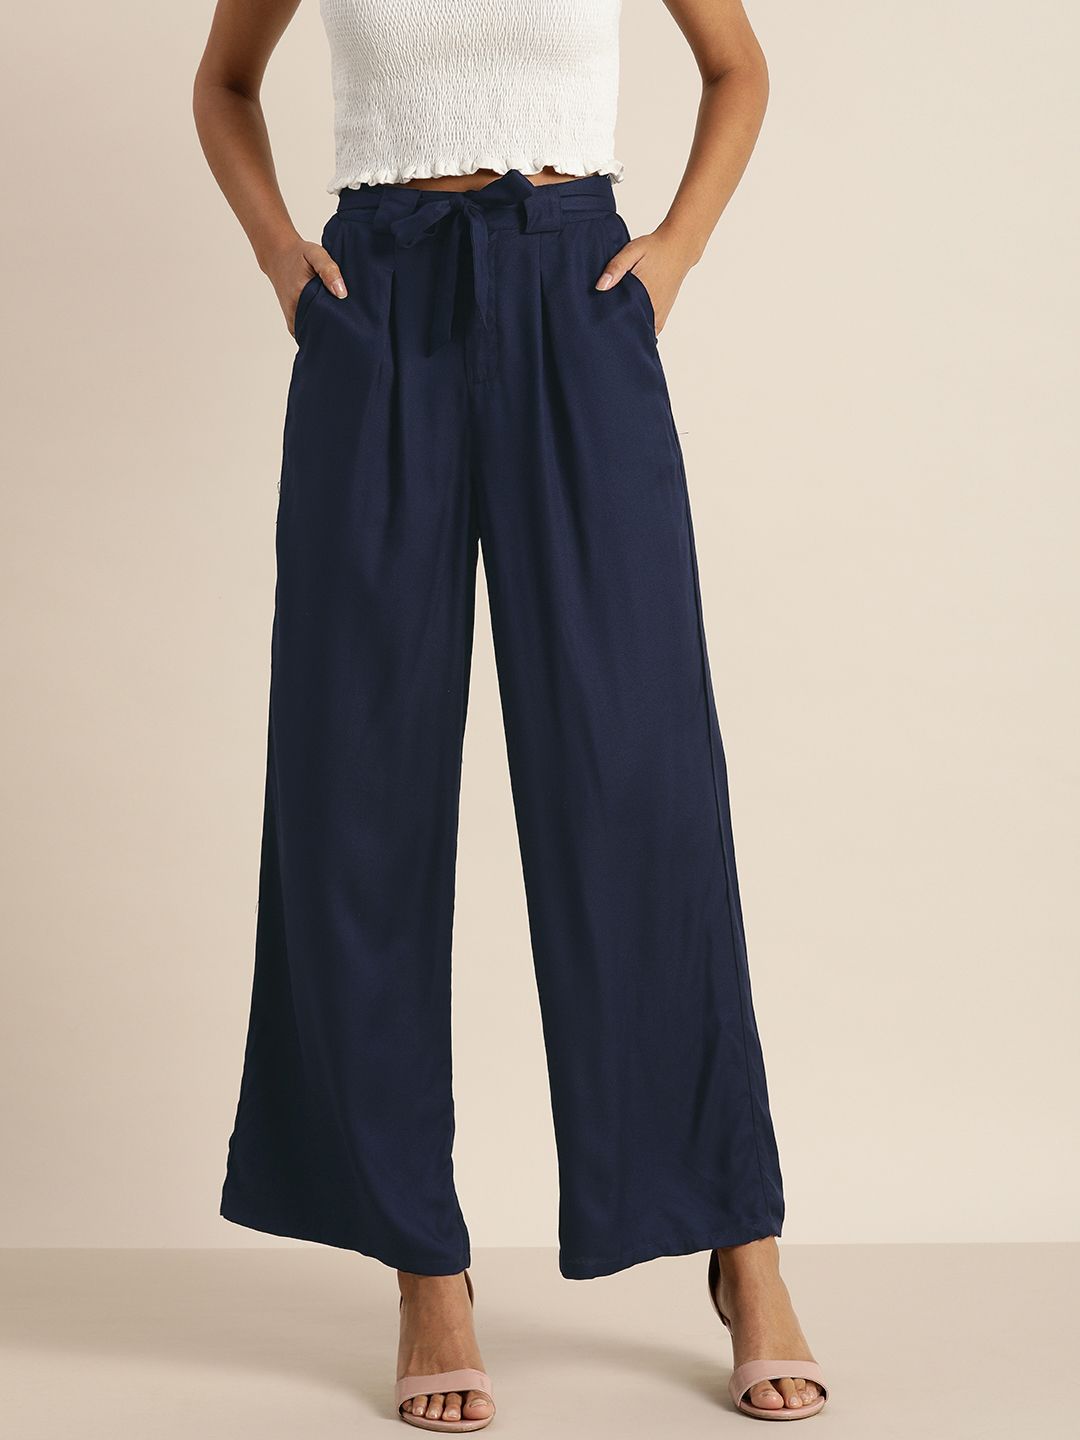 all about you Women Navy Blue Regular Fit Solid Pleated Parallel Trousers Price in India